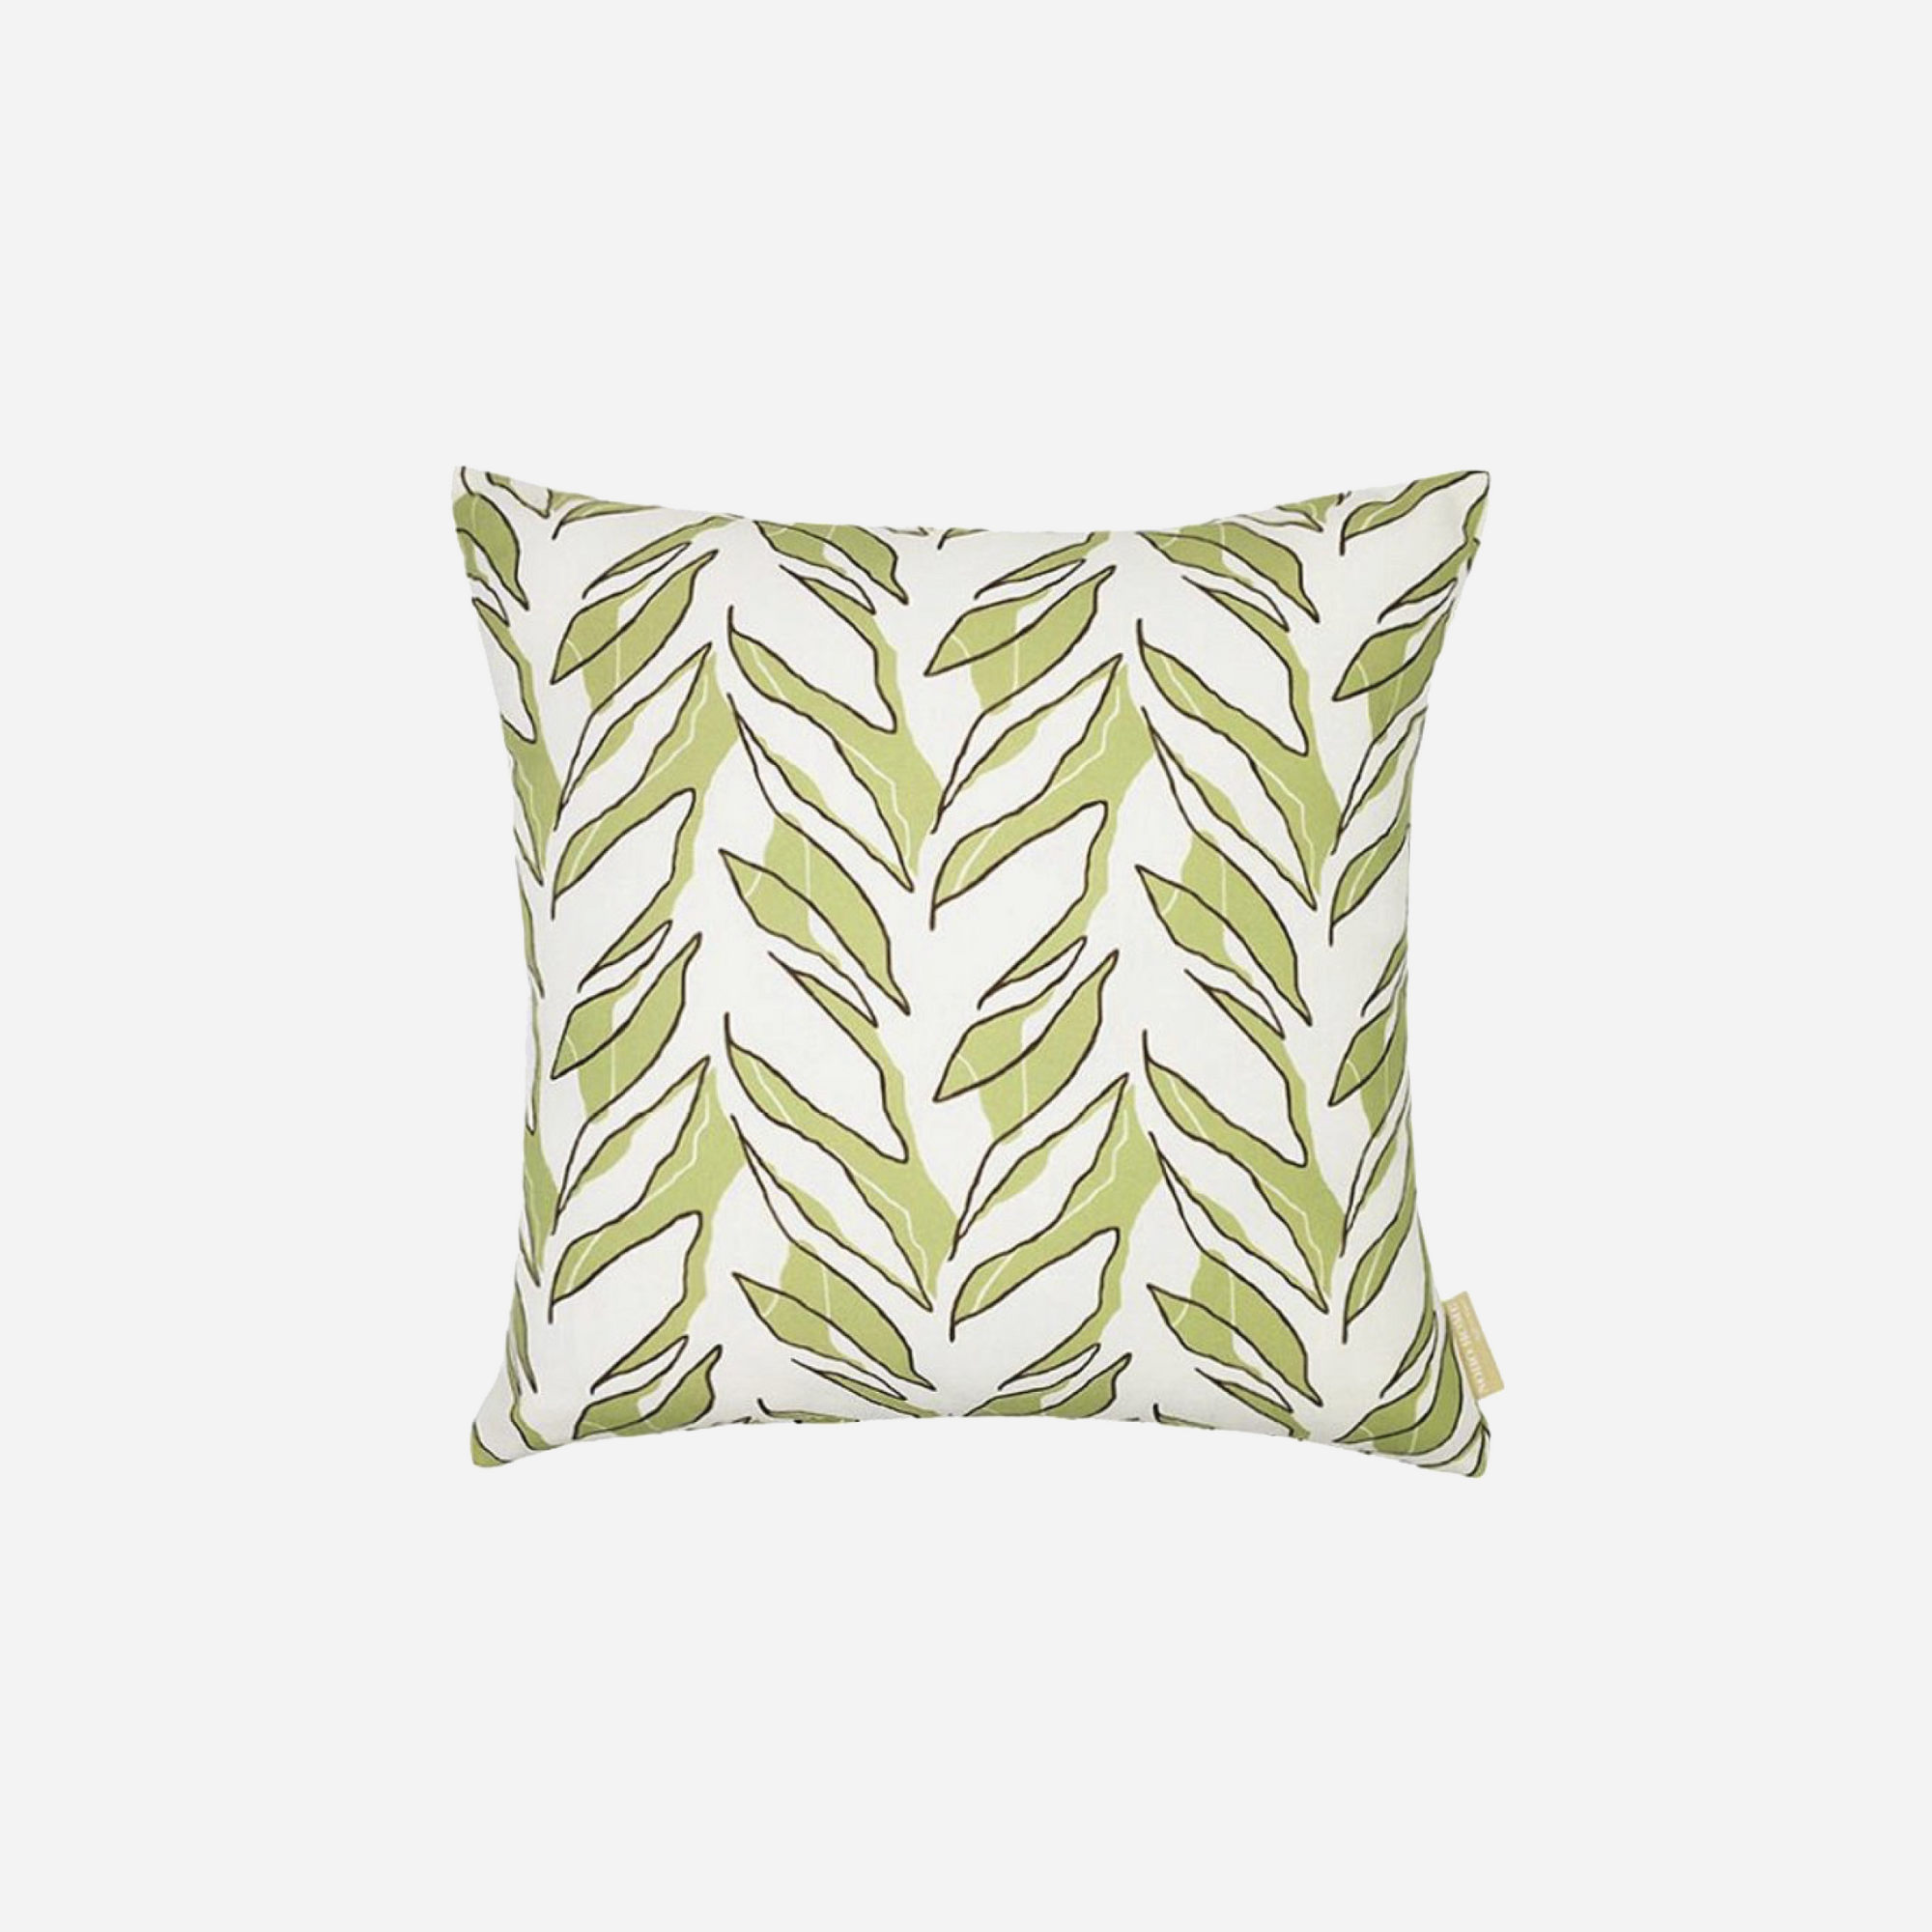 Noho Home - Decorative Pillow Covers 20"x 20"